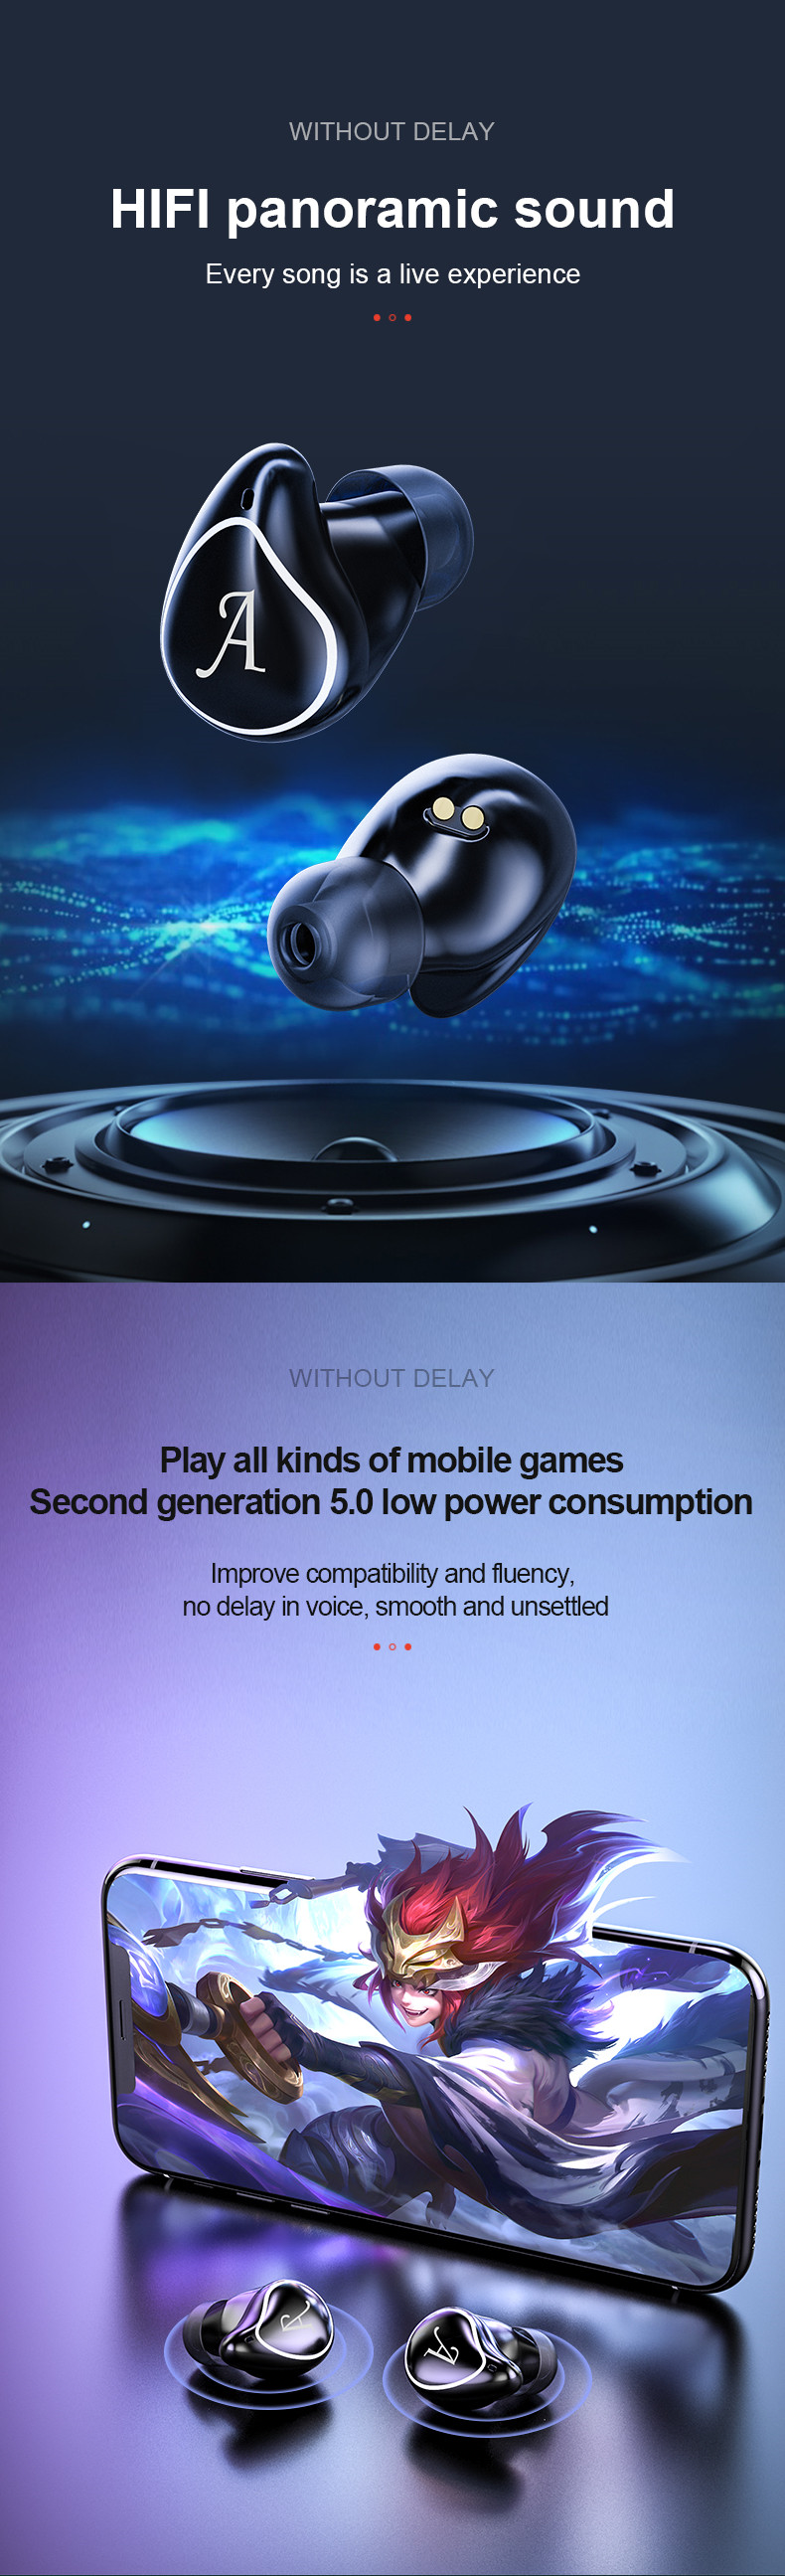 A4-TWS-Earphone-bluetooth-Wireless-Headphone-Touch-Control-Binaural-Earbuds-with-Charging-Case-1591022-2